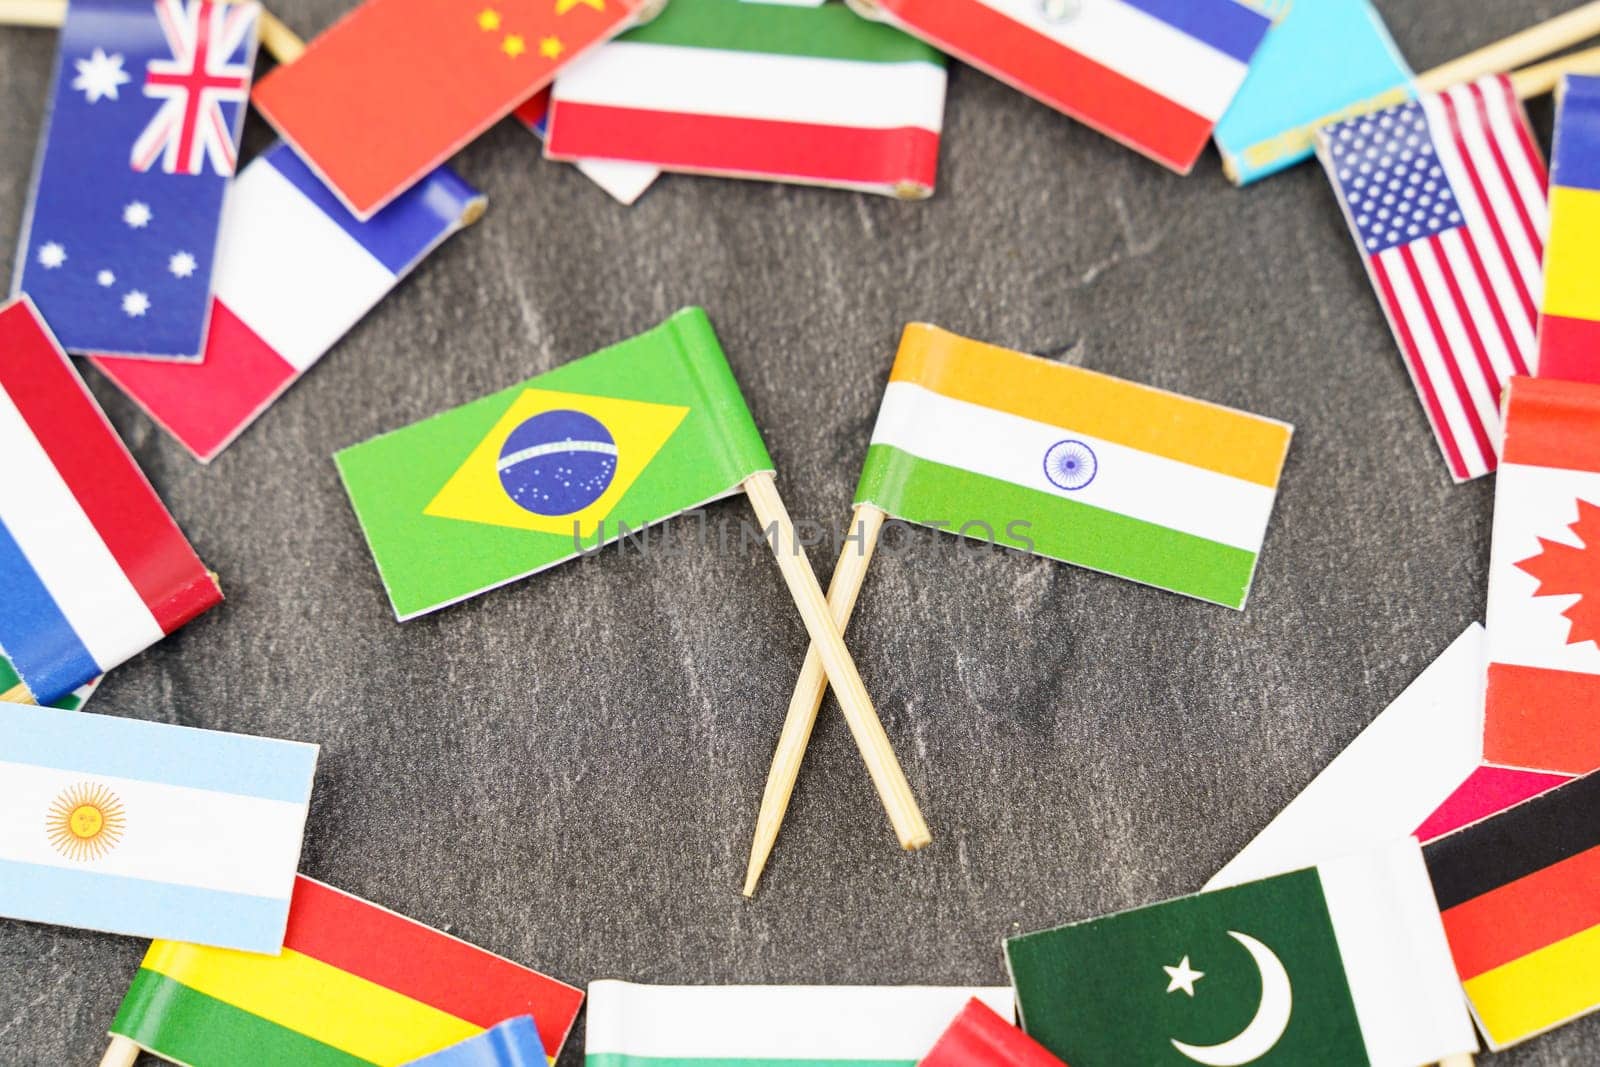 Policy. National flags of different countries. The concept is diplomacy. In the middle among the various flags are two flags - India, Brazil